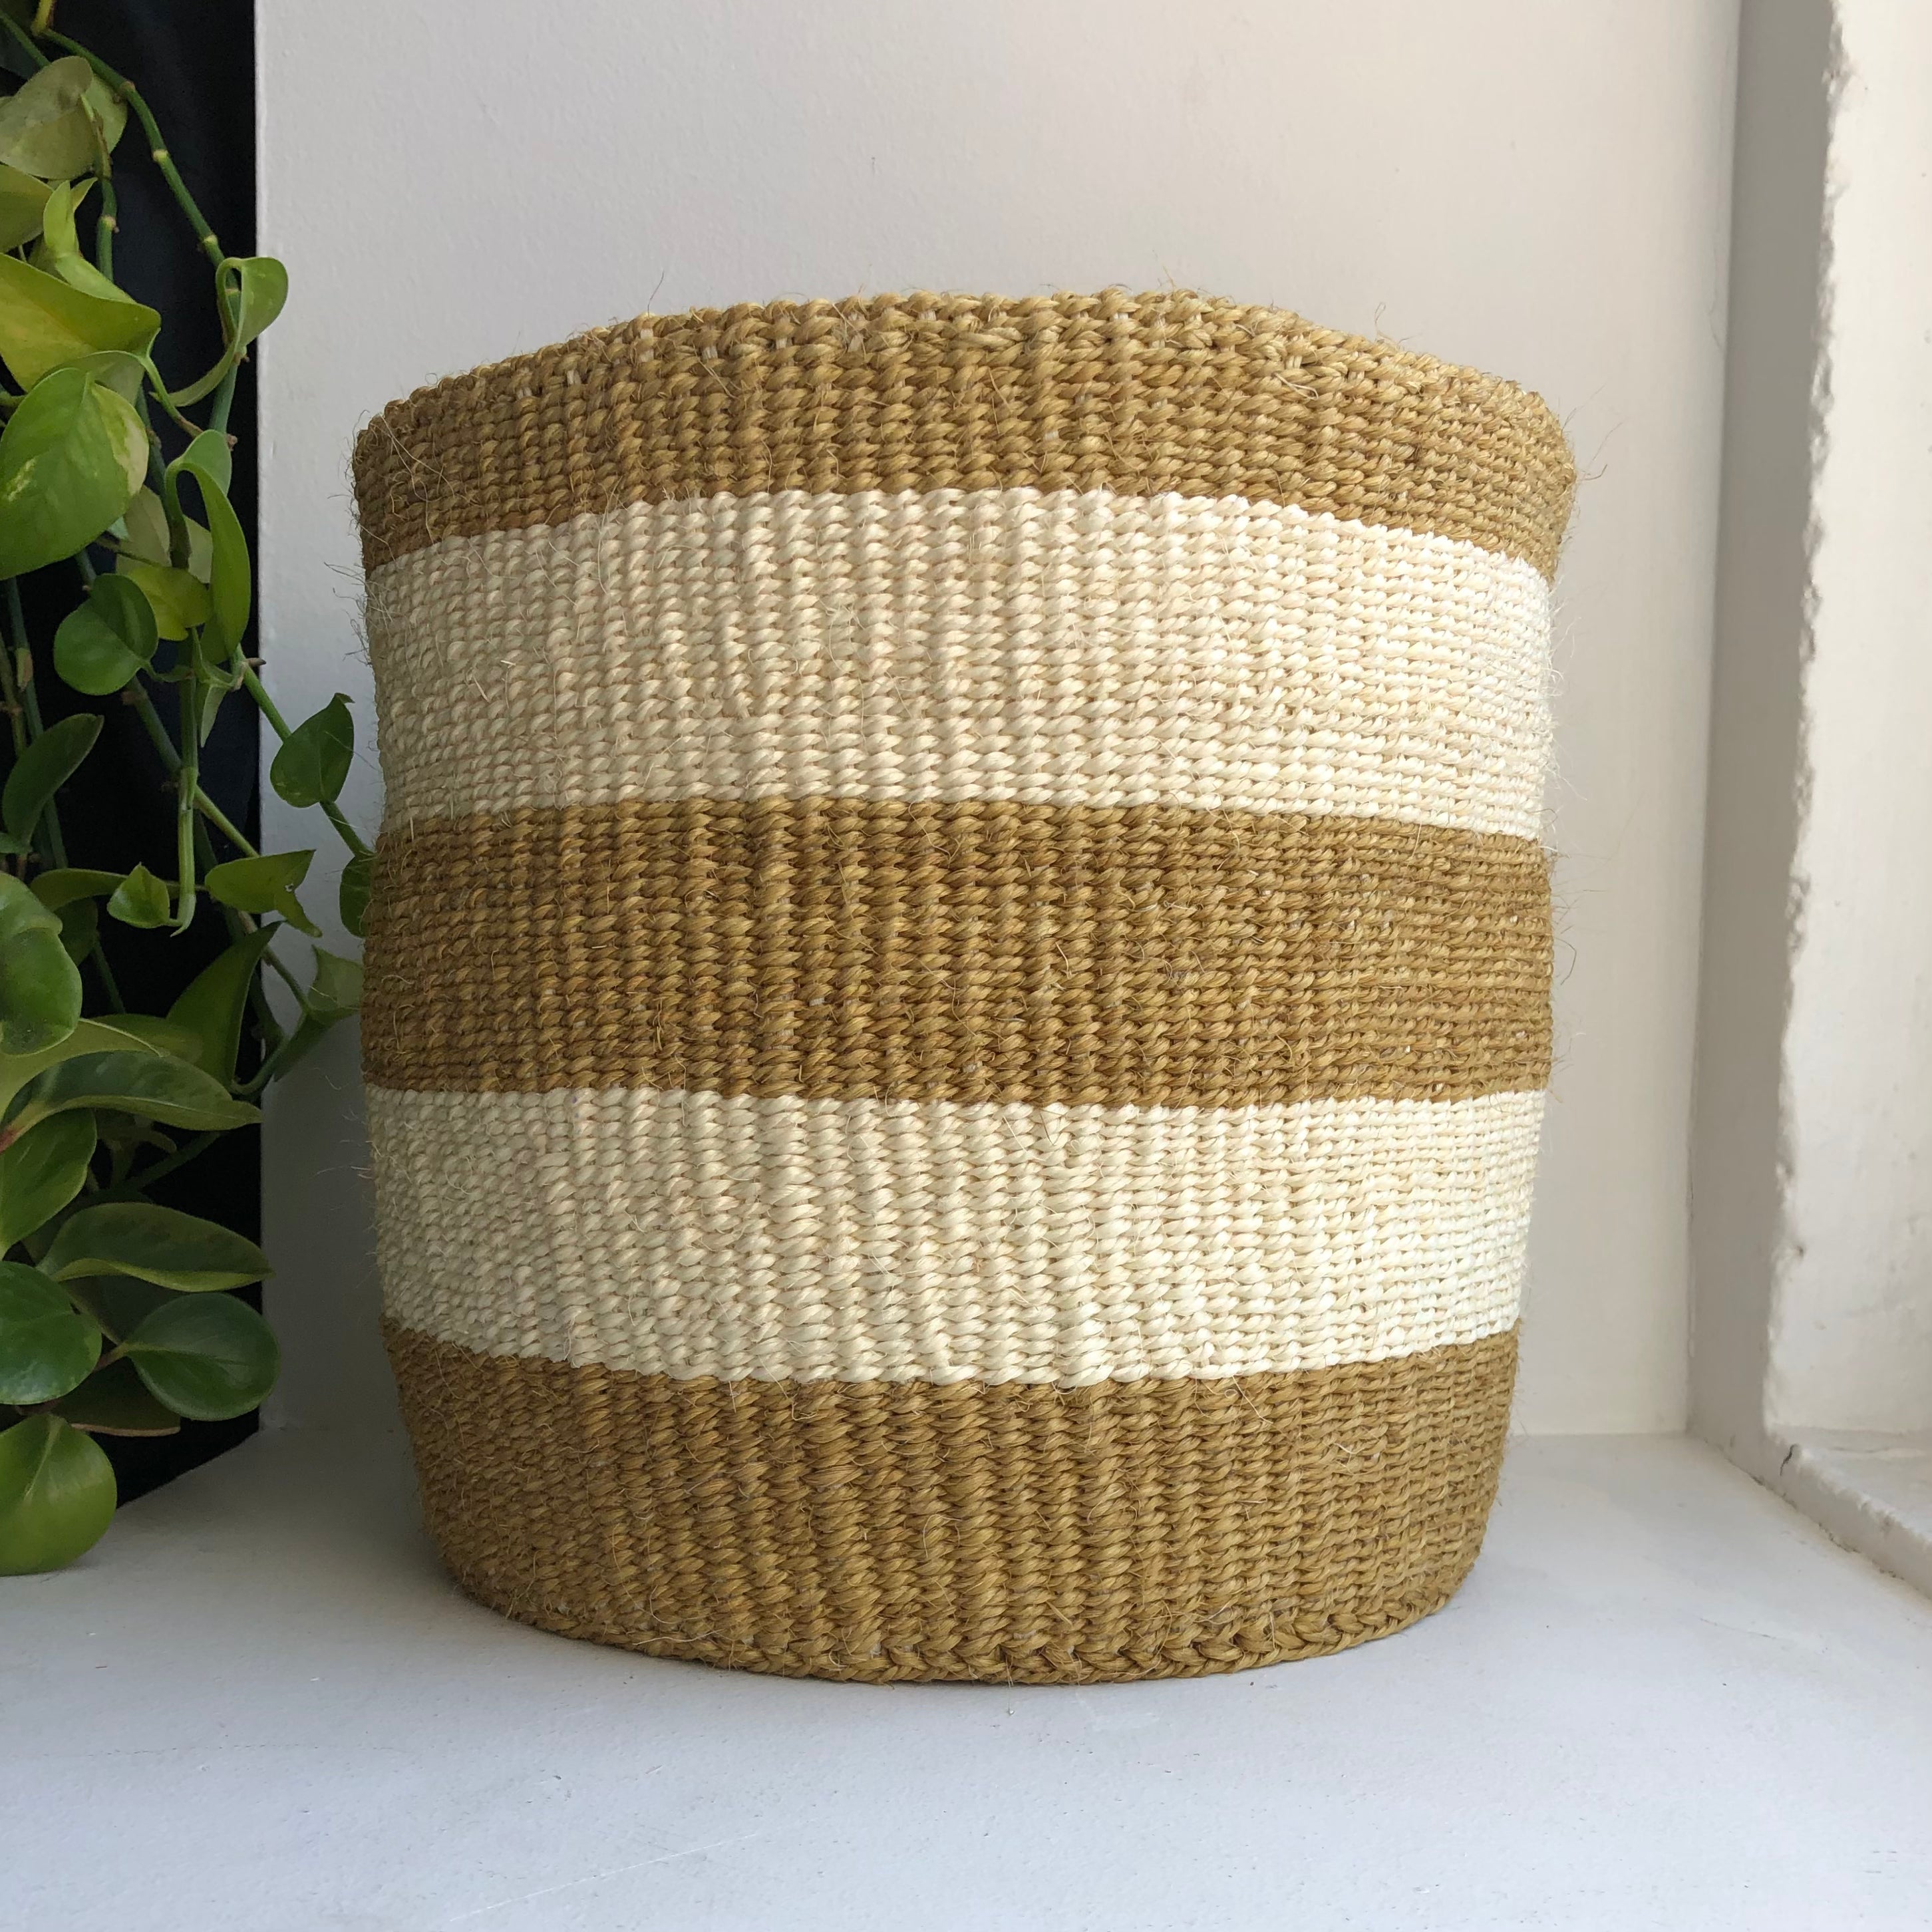 10" sisal basket with natural tone stripes